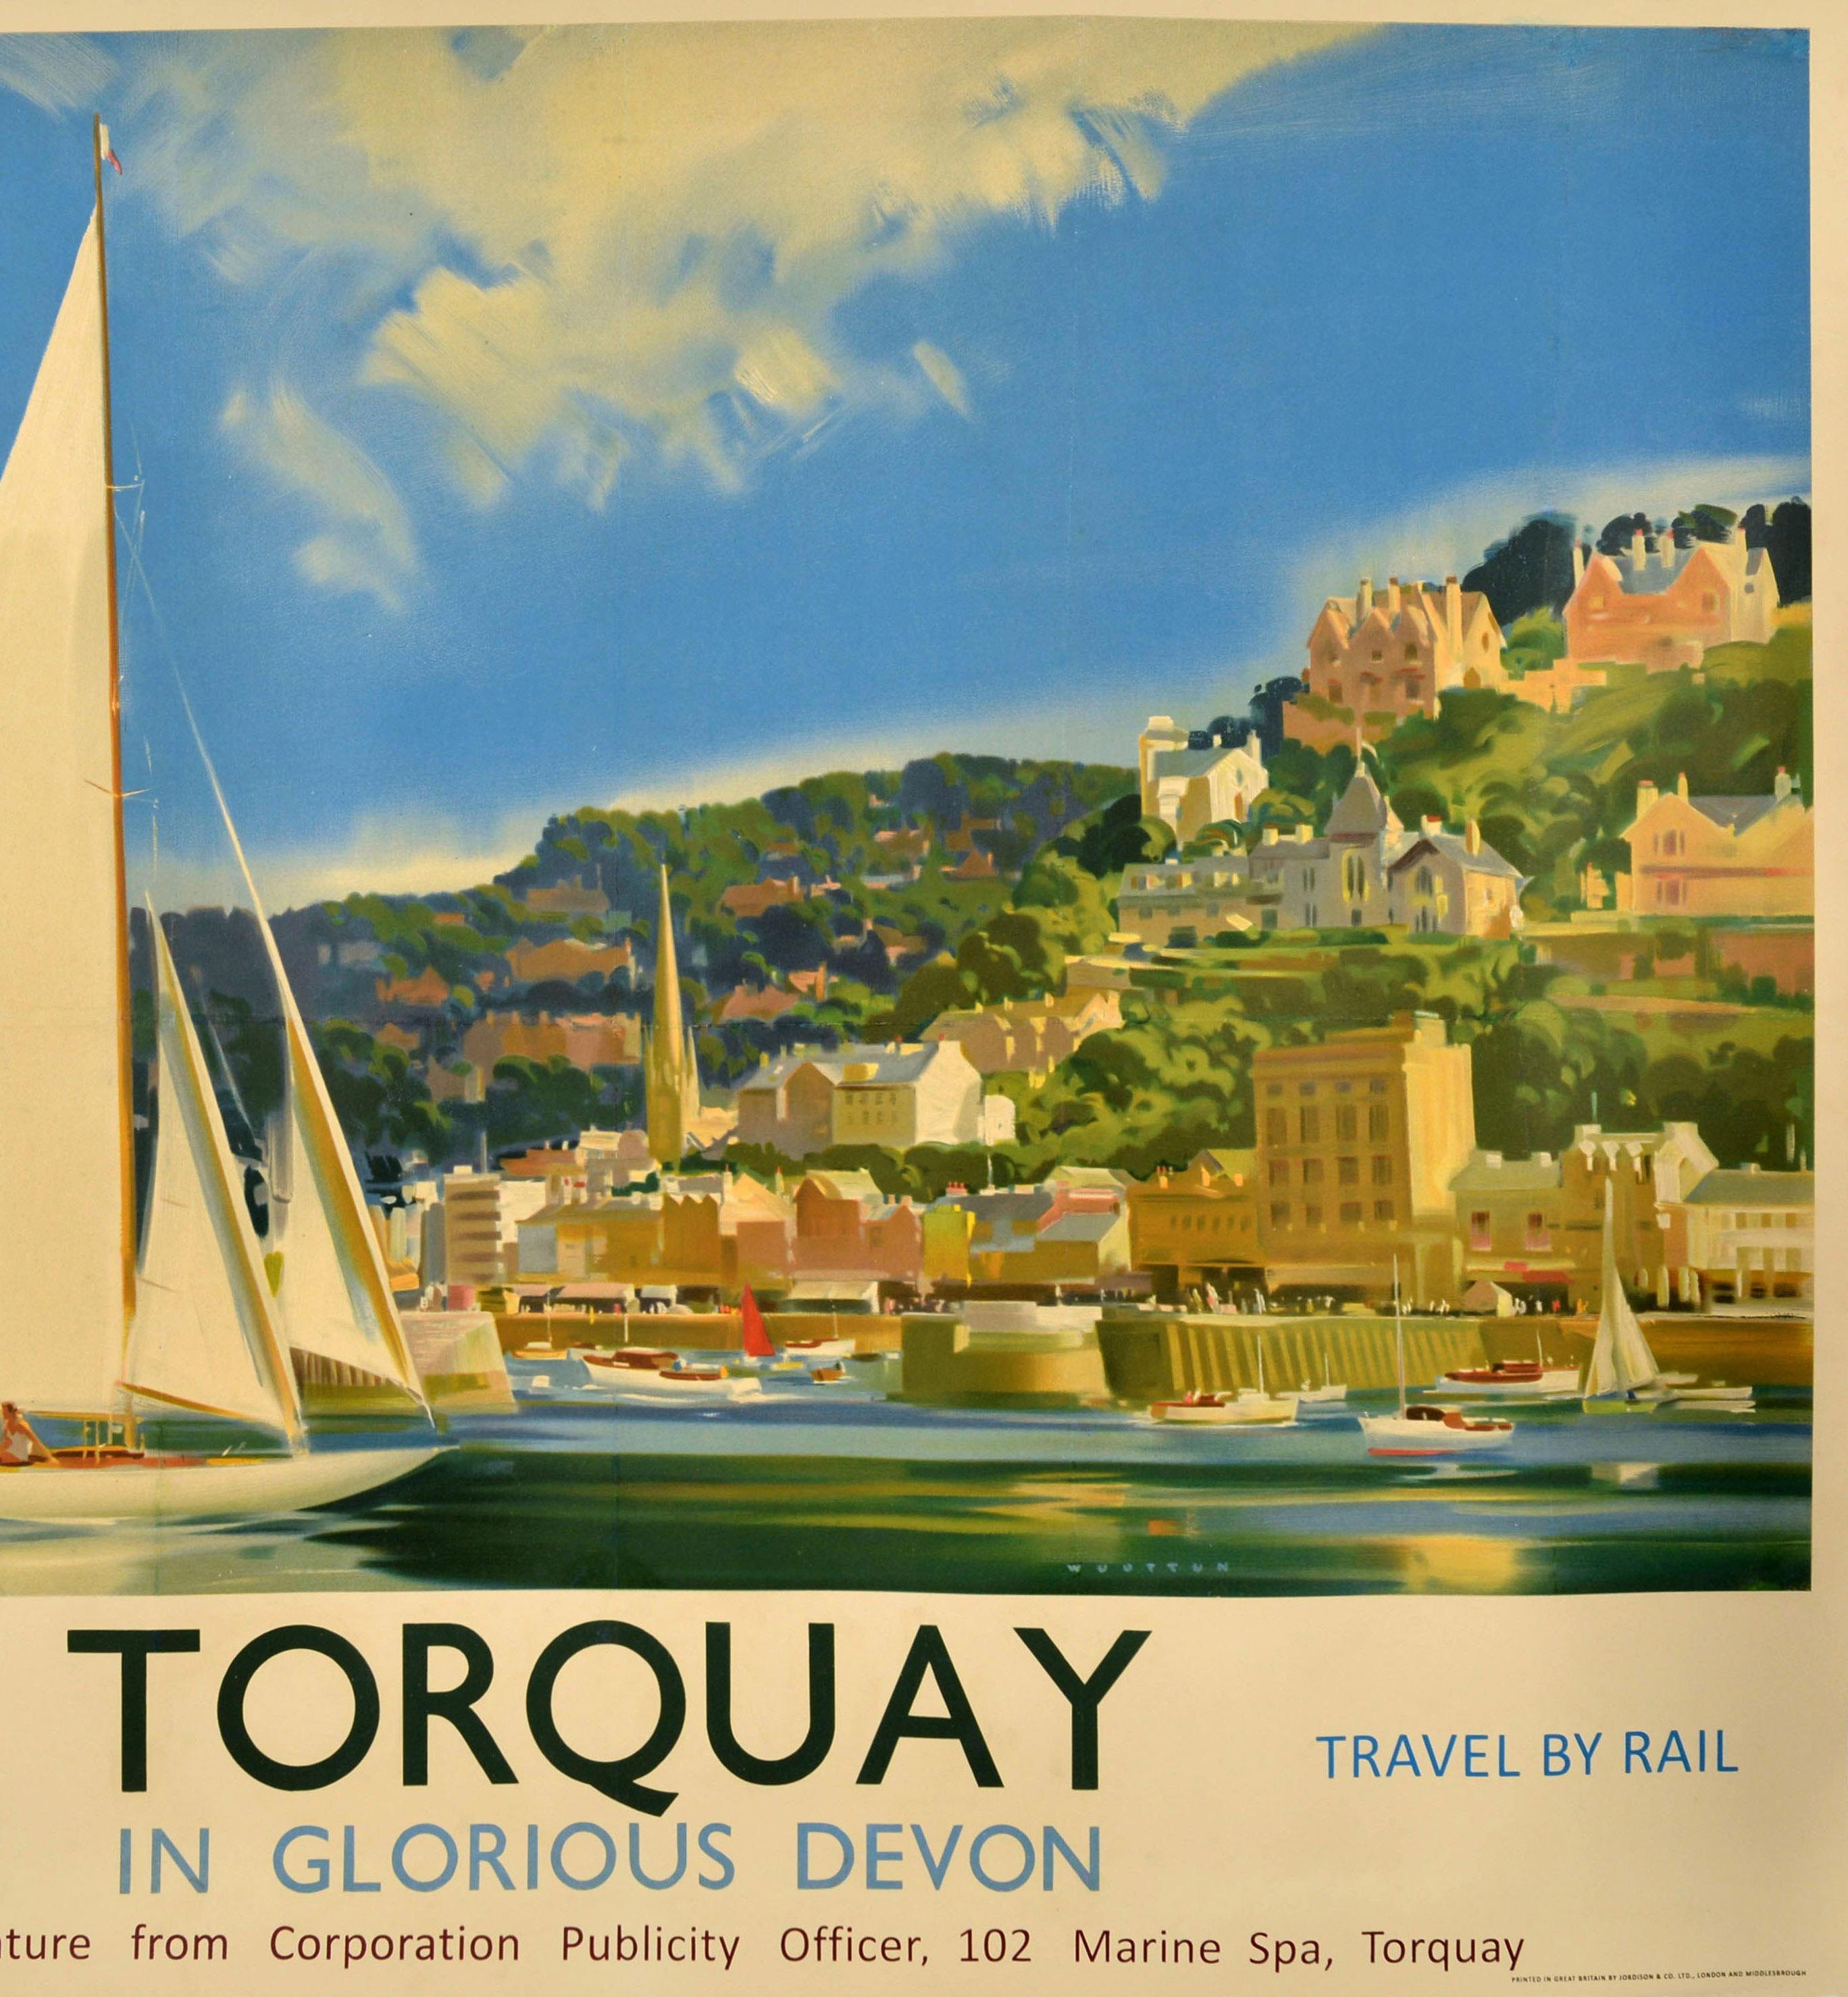 Original vintage British Railways poster for the seaside town of Torquay in Glorious Devon featuring stunning artwork by the notable British painter and illustrator Frank Wootton (1911-1998) depicting a colourful sunny view of people on a sailing